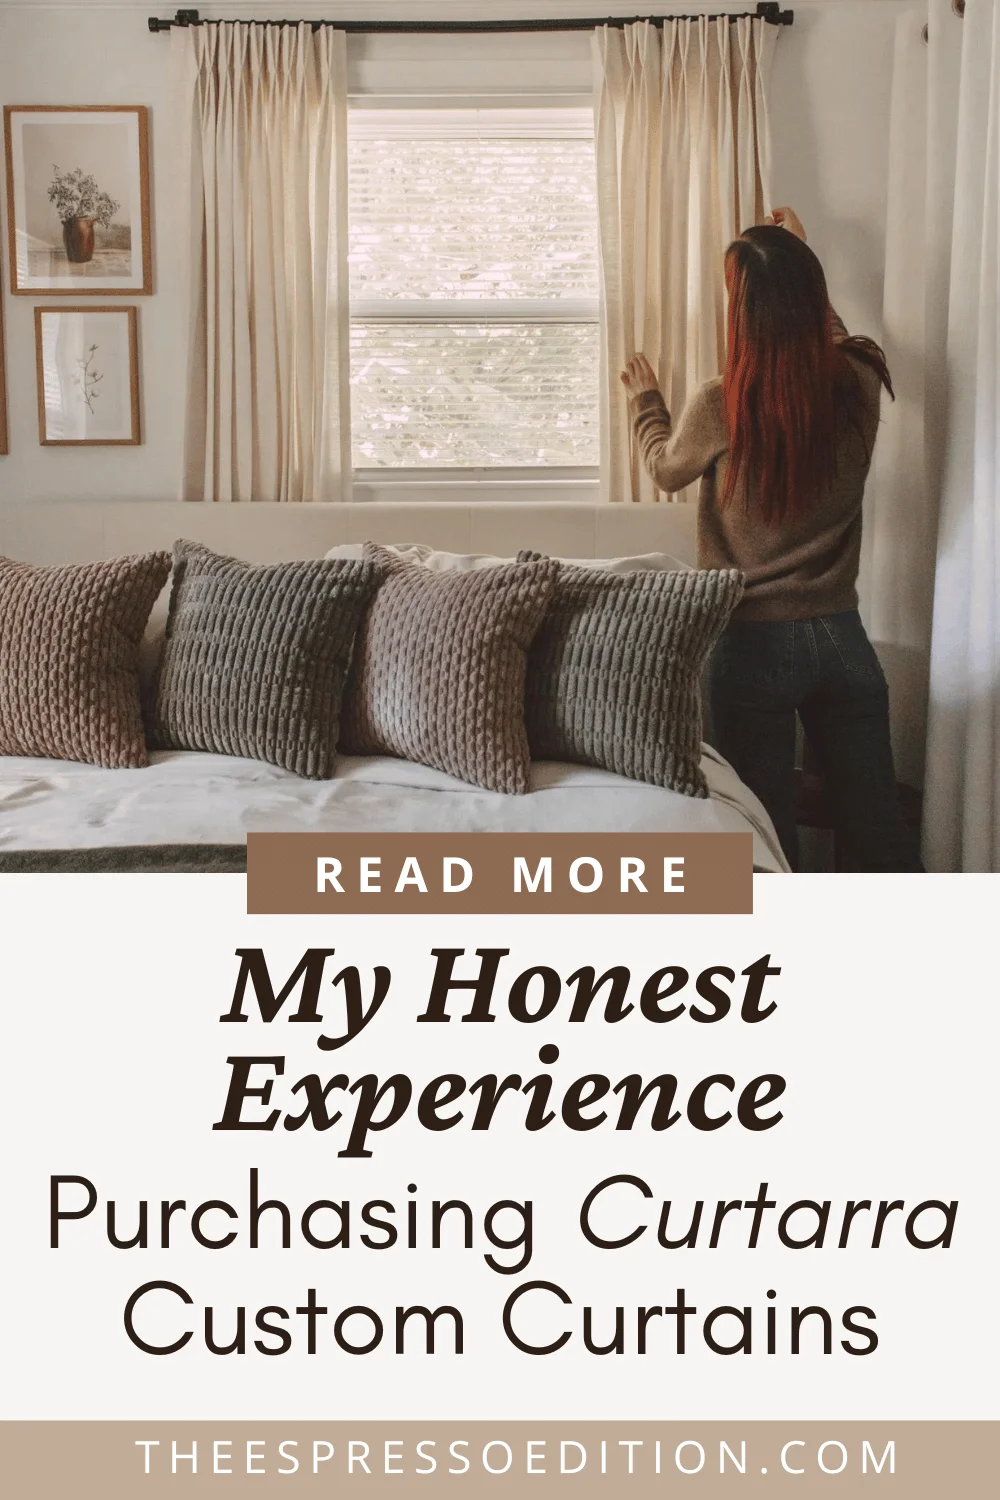 My Honest Experience Purchasing Curtarra Custom Curtains by The Espresso Edition cozy lifestyle blog